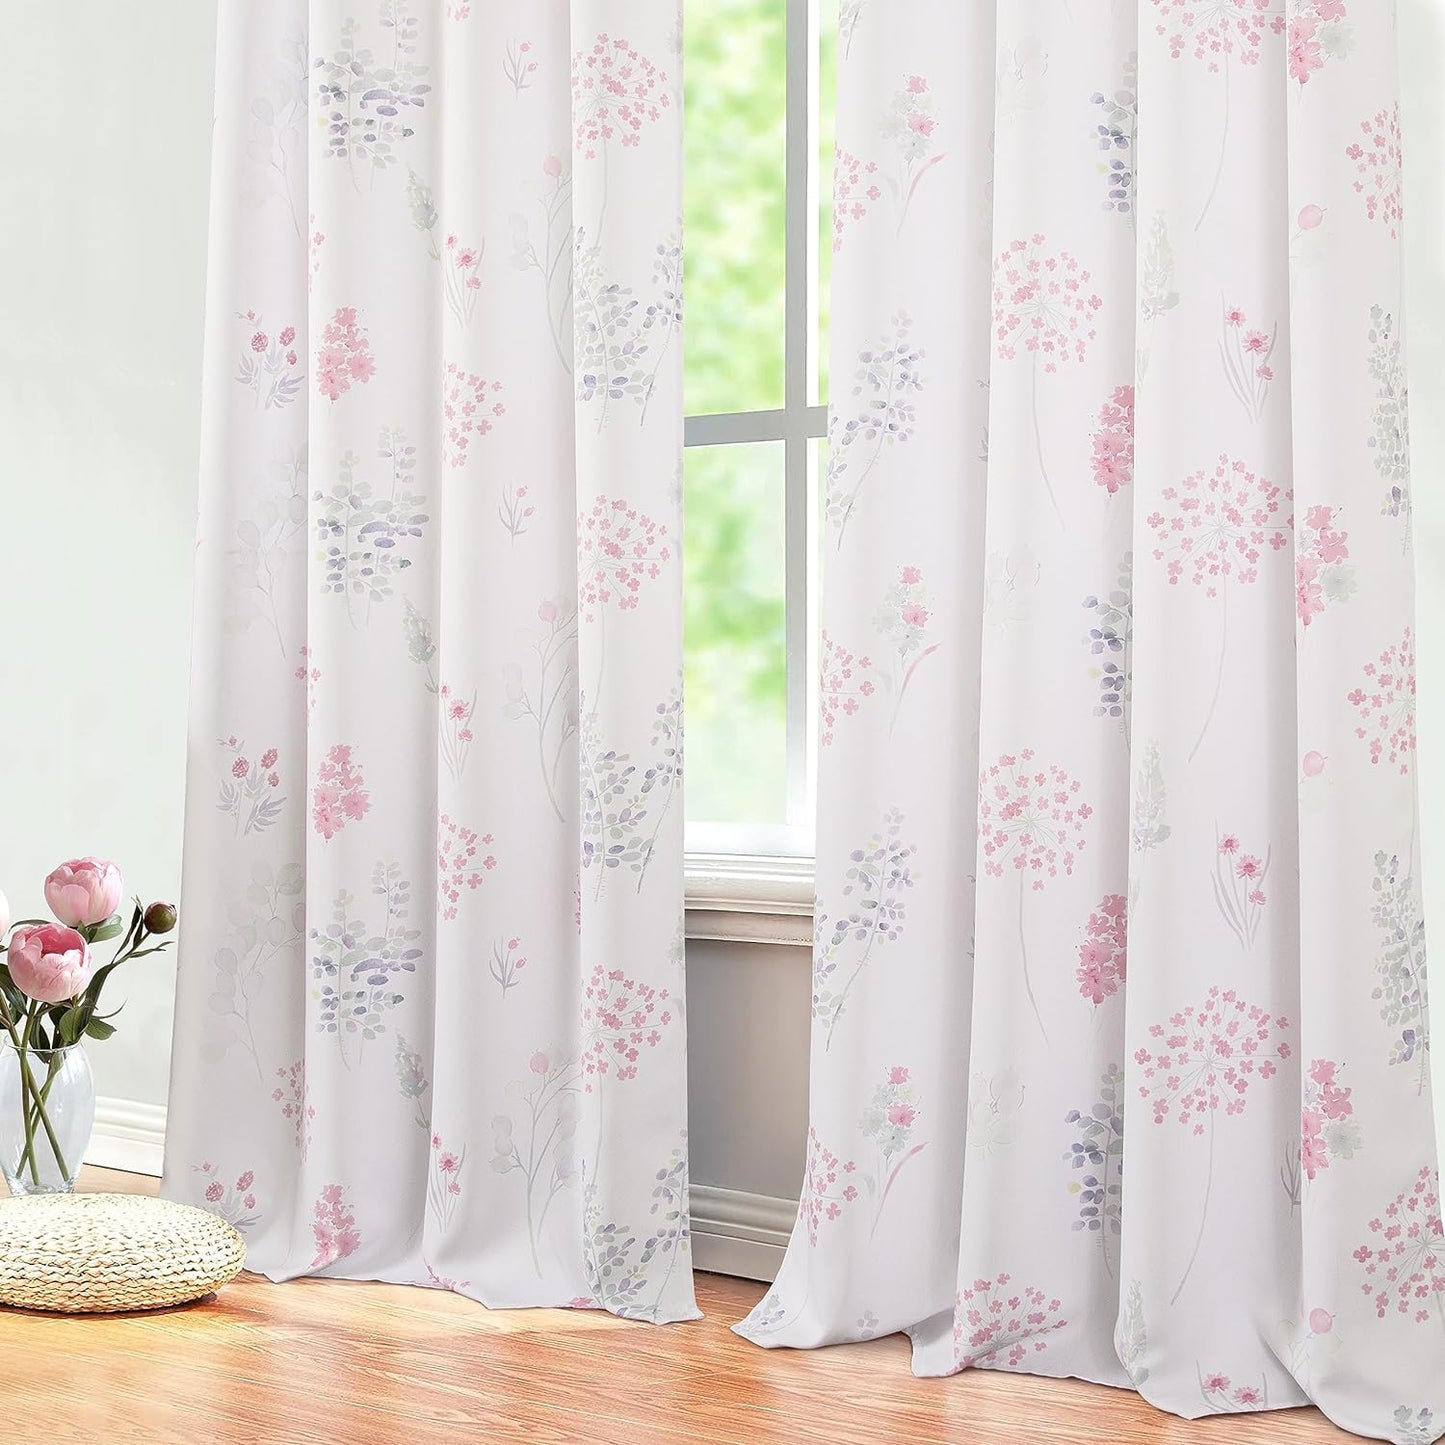 XTMYI 63 Inch Length Sage Green Window Curtains for Bedroom 2 Panels,Room Darkening Watercolor Floral Leaves 80% Blackout Flowered Printed Curtains for Living Room with Grommet,1 Pair Set  XTMYI Pink  Green 52"X84" 